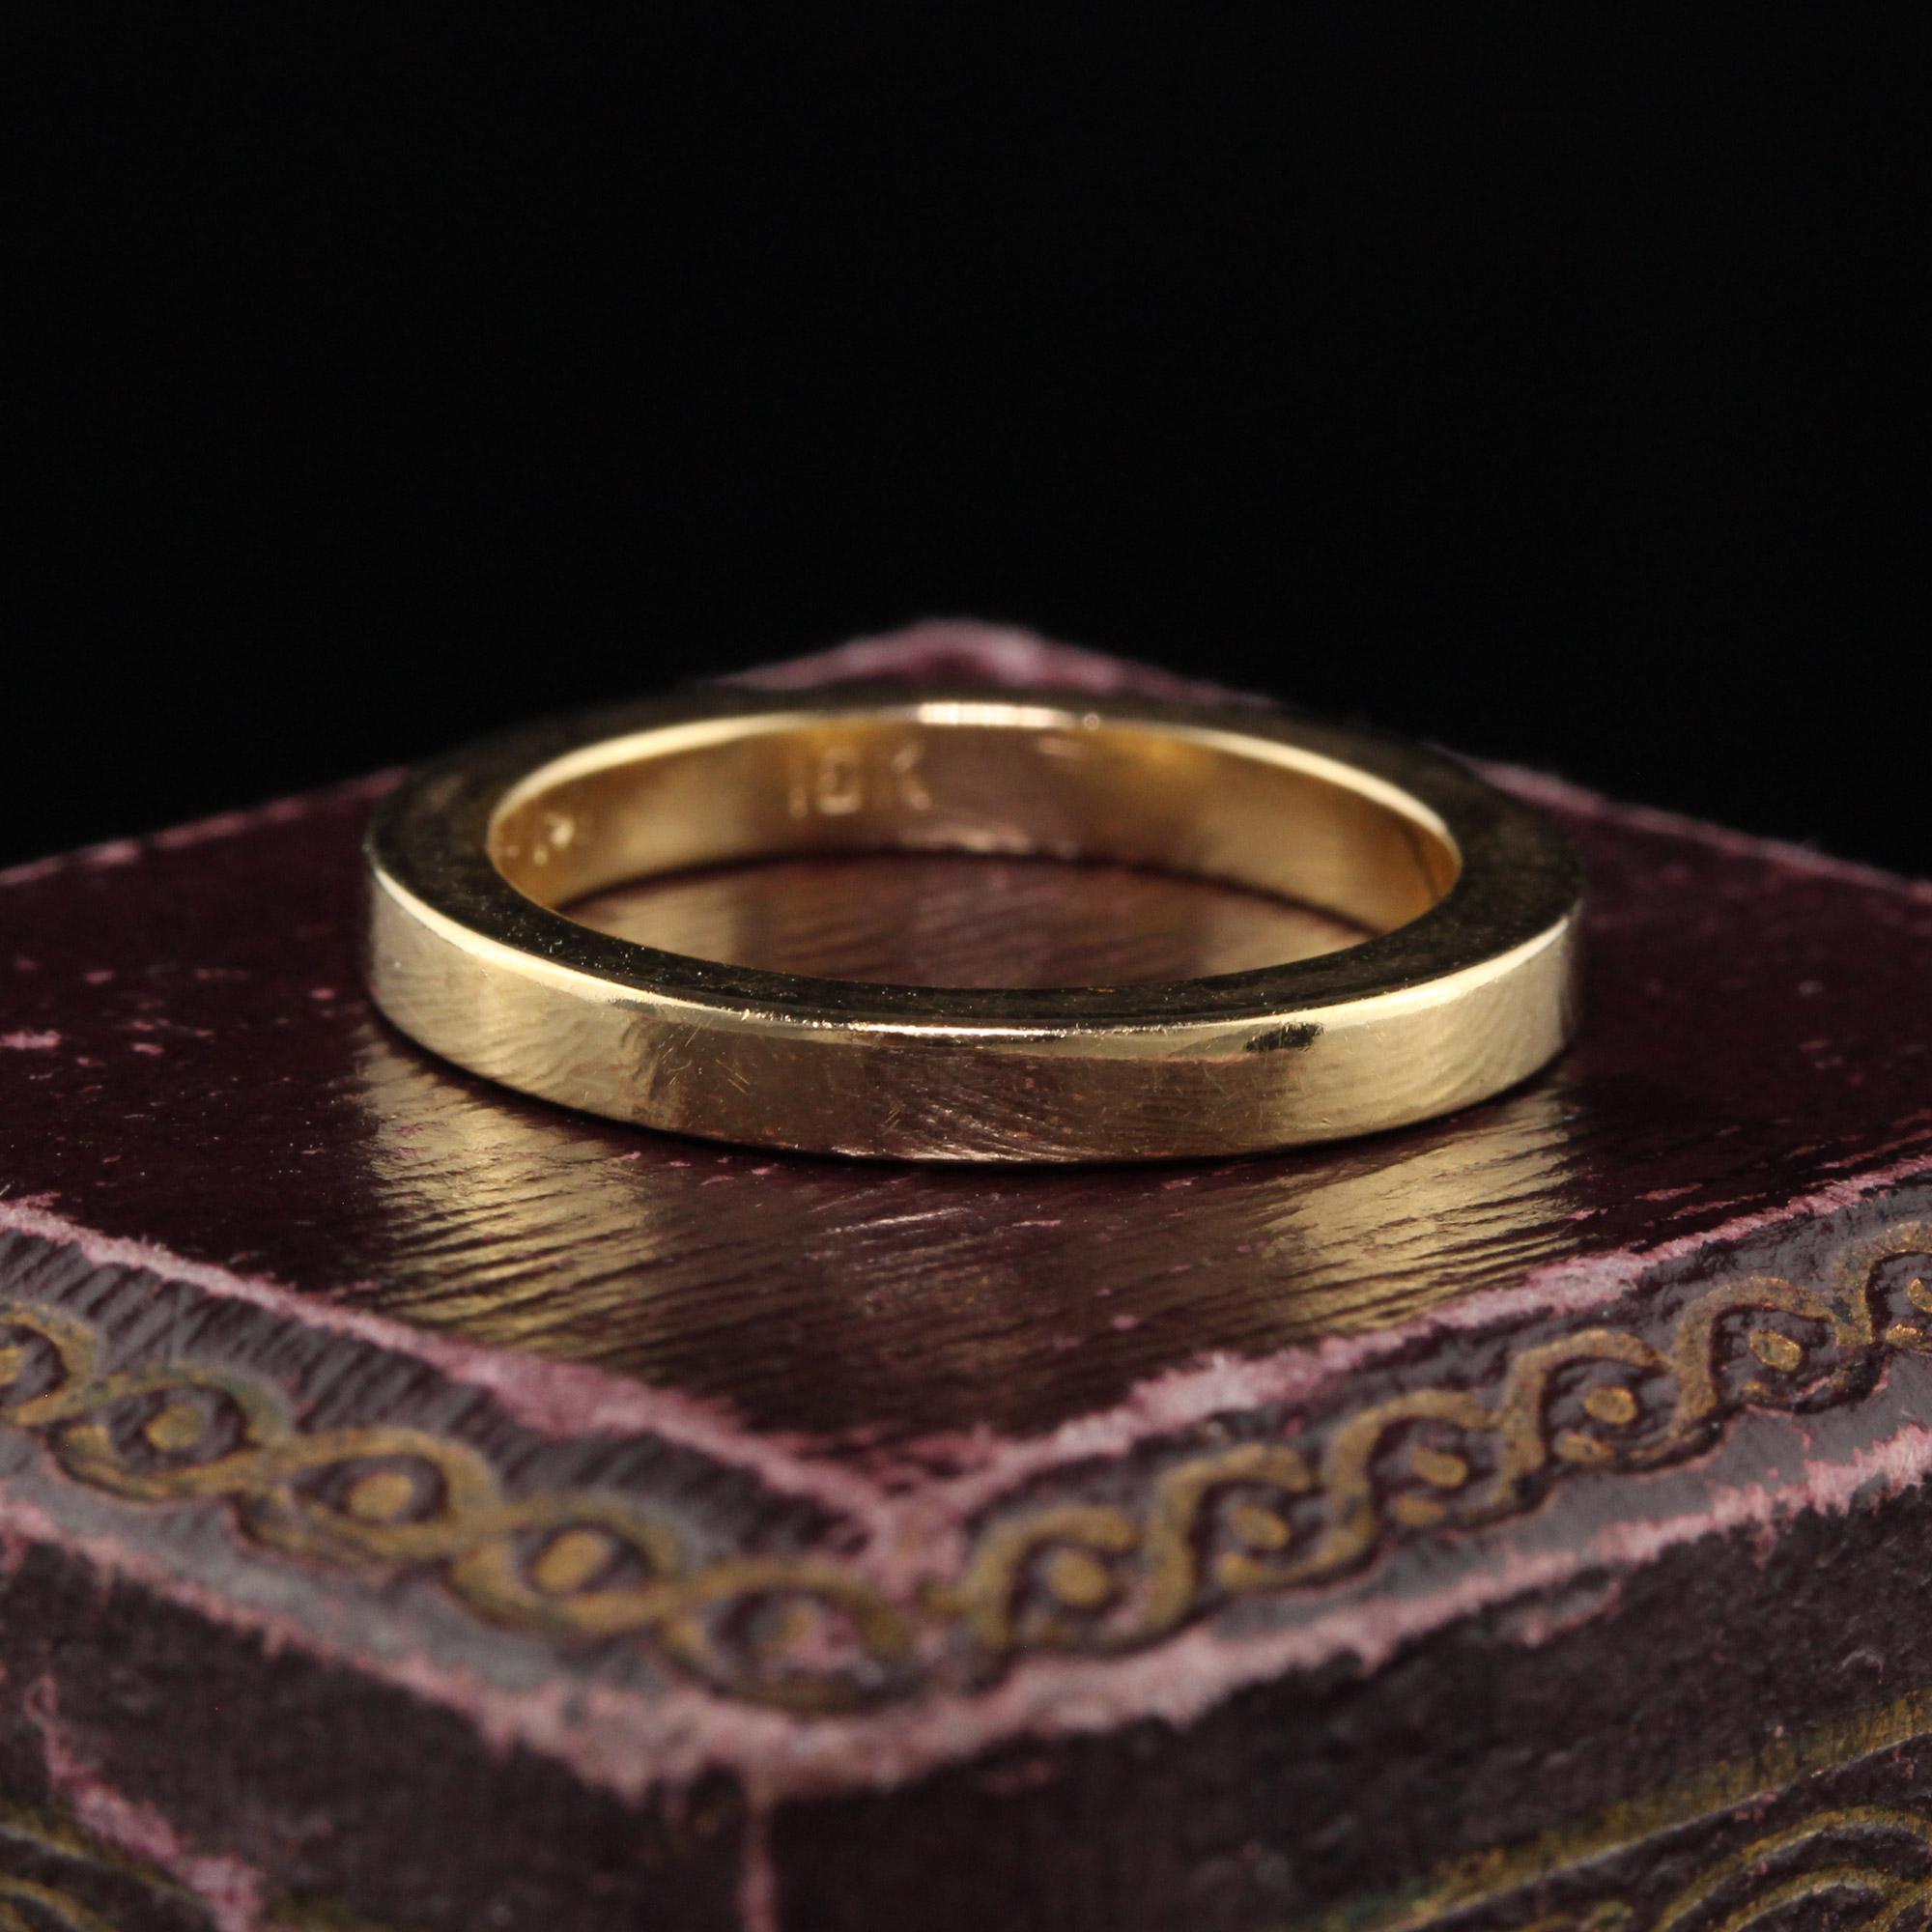 Beautiful Vintage Estate Retro 18K Yellow Gold Classic Wedding Band. This classic wedding band is crafted in solid 18K yellow gold and is in good condition.

Item #R1160

Metal: 18K Yellow Gold

Weight: 4.4 Grams

Size: 4 1/2

Measurements: Top of